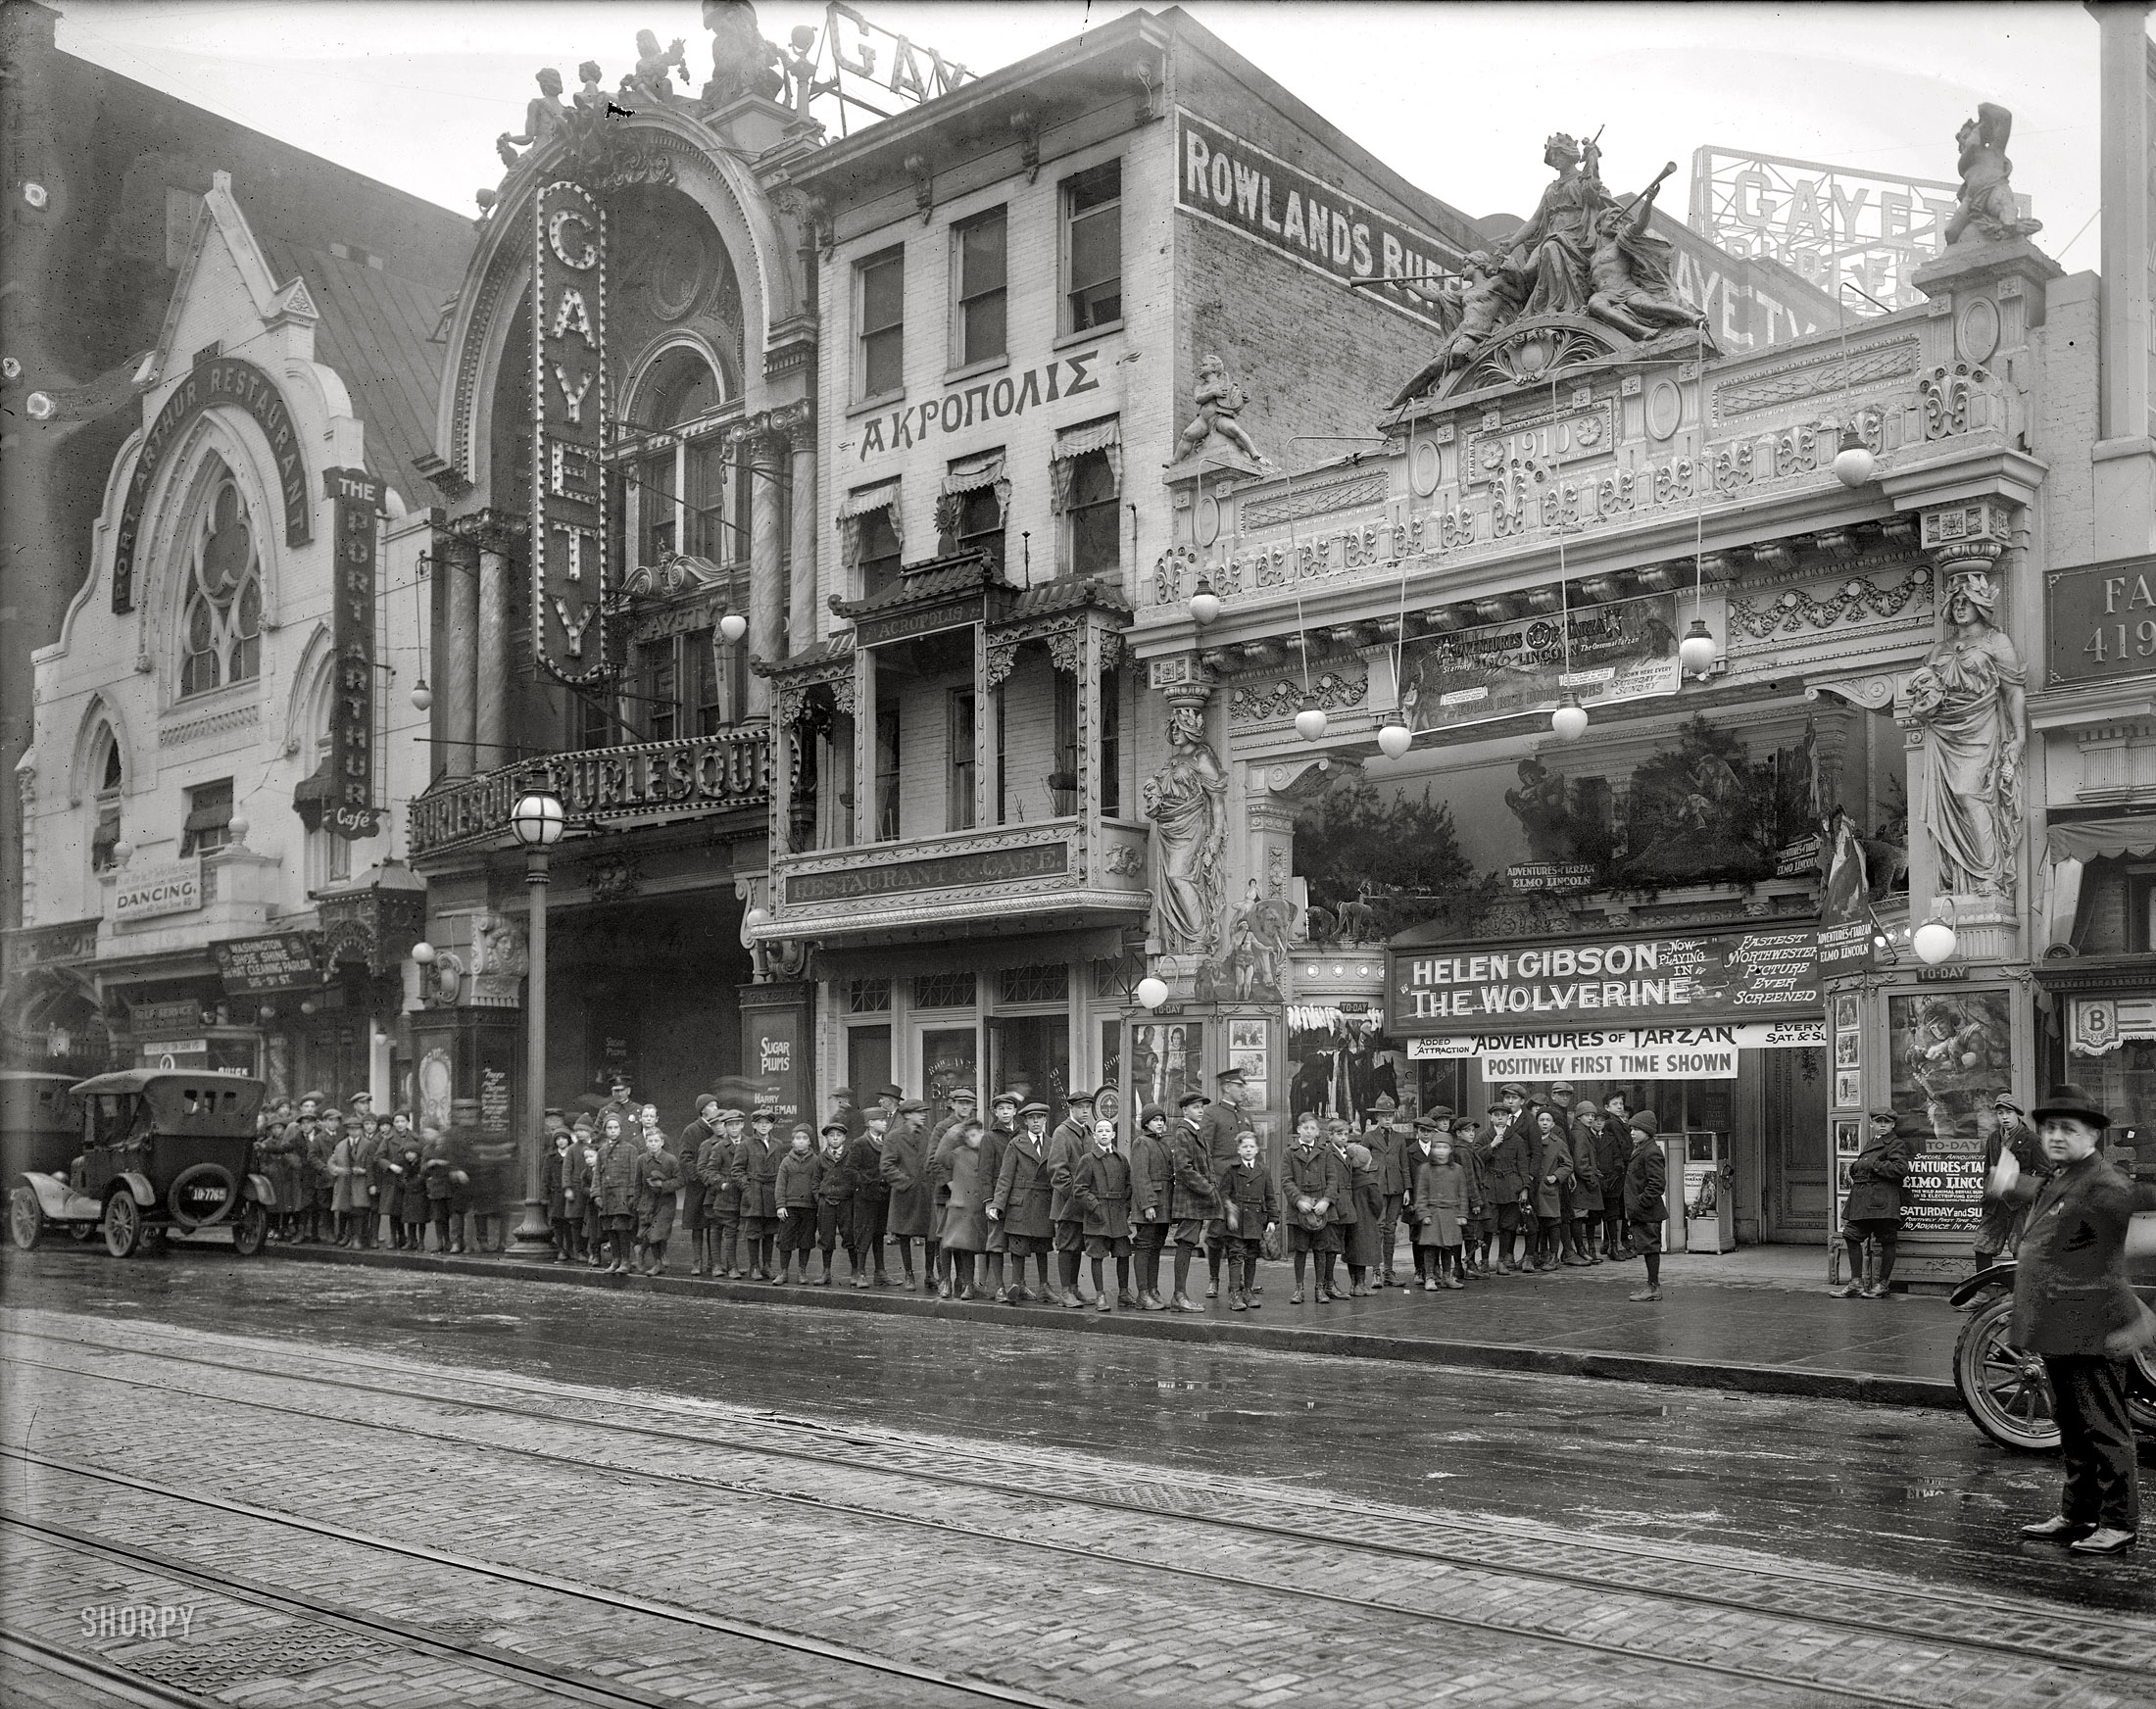 Washington, D.C., circa 1922. "Leader Theater, front." Sidney Lust's movie house on Ninth Street N.W. National Photo Company glass negative. View full size.